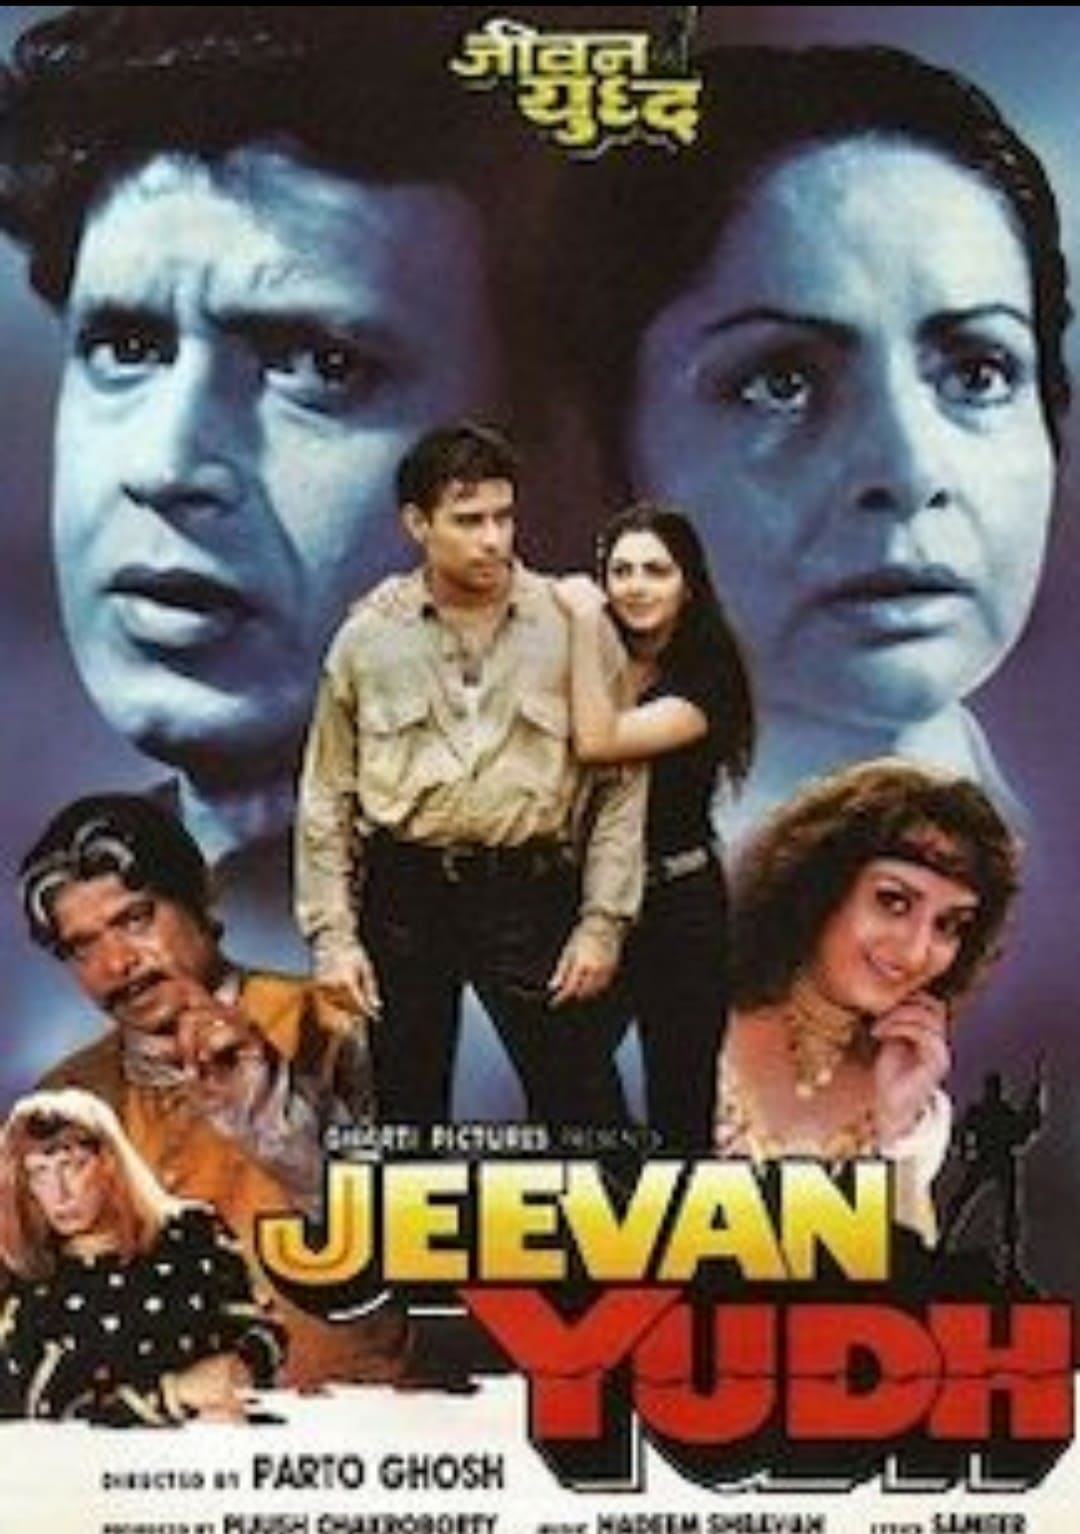 Poster for the movie "Jeevan Yudh"